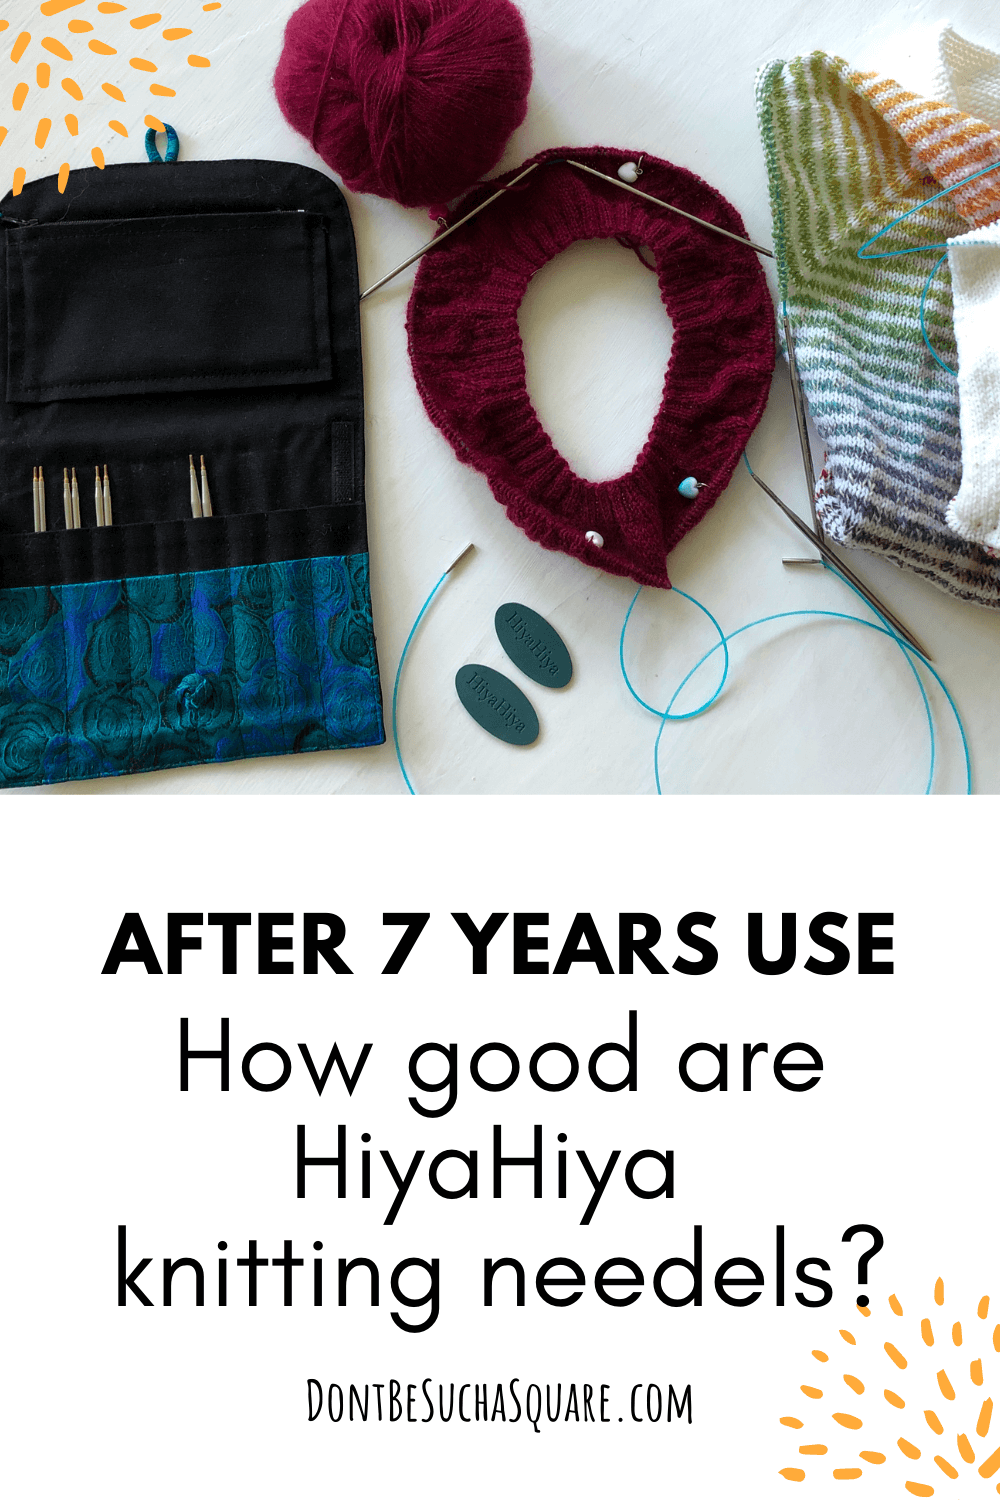 Review: HiyaHiya Interchangeable Knitting needle set. I have been knitting with this set of needles since 2014 (that's over 7 years!) 